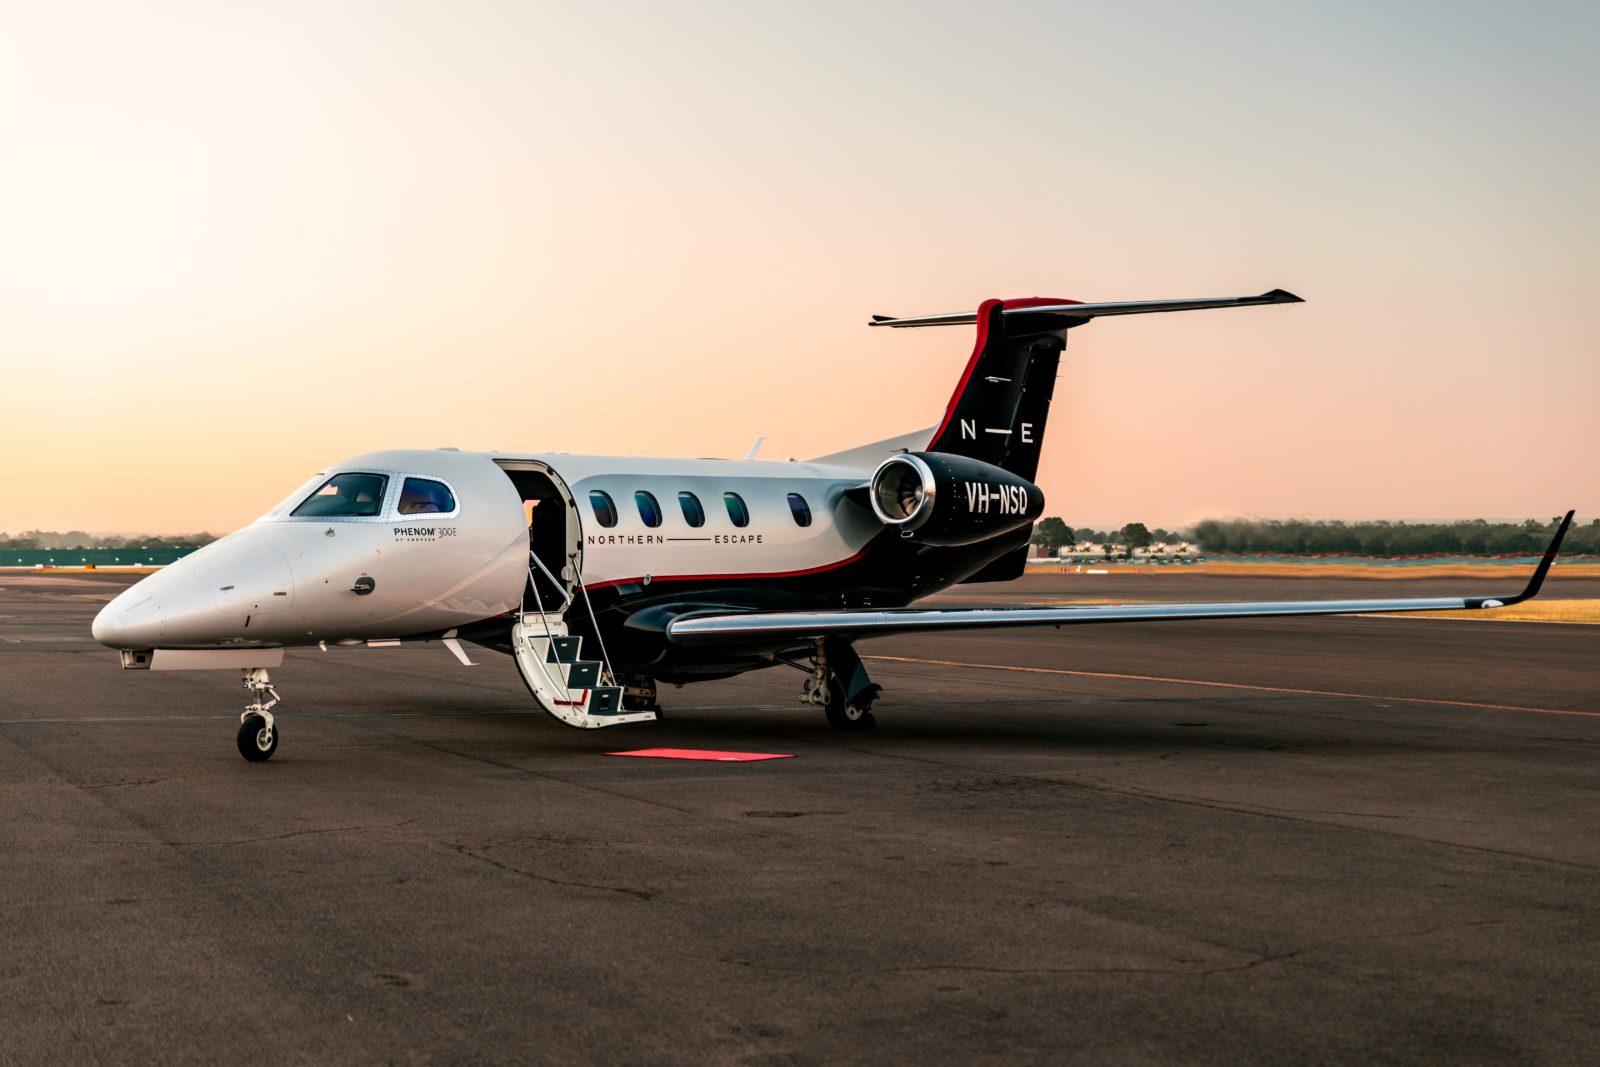 The Phenom 300 seats up to 9 passengers, and is the best selling private light jet in the world.